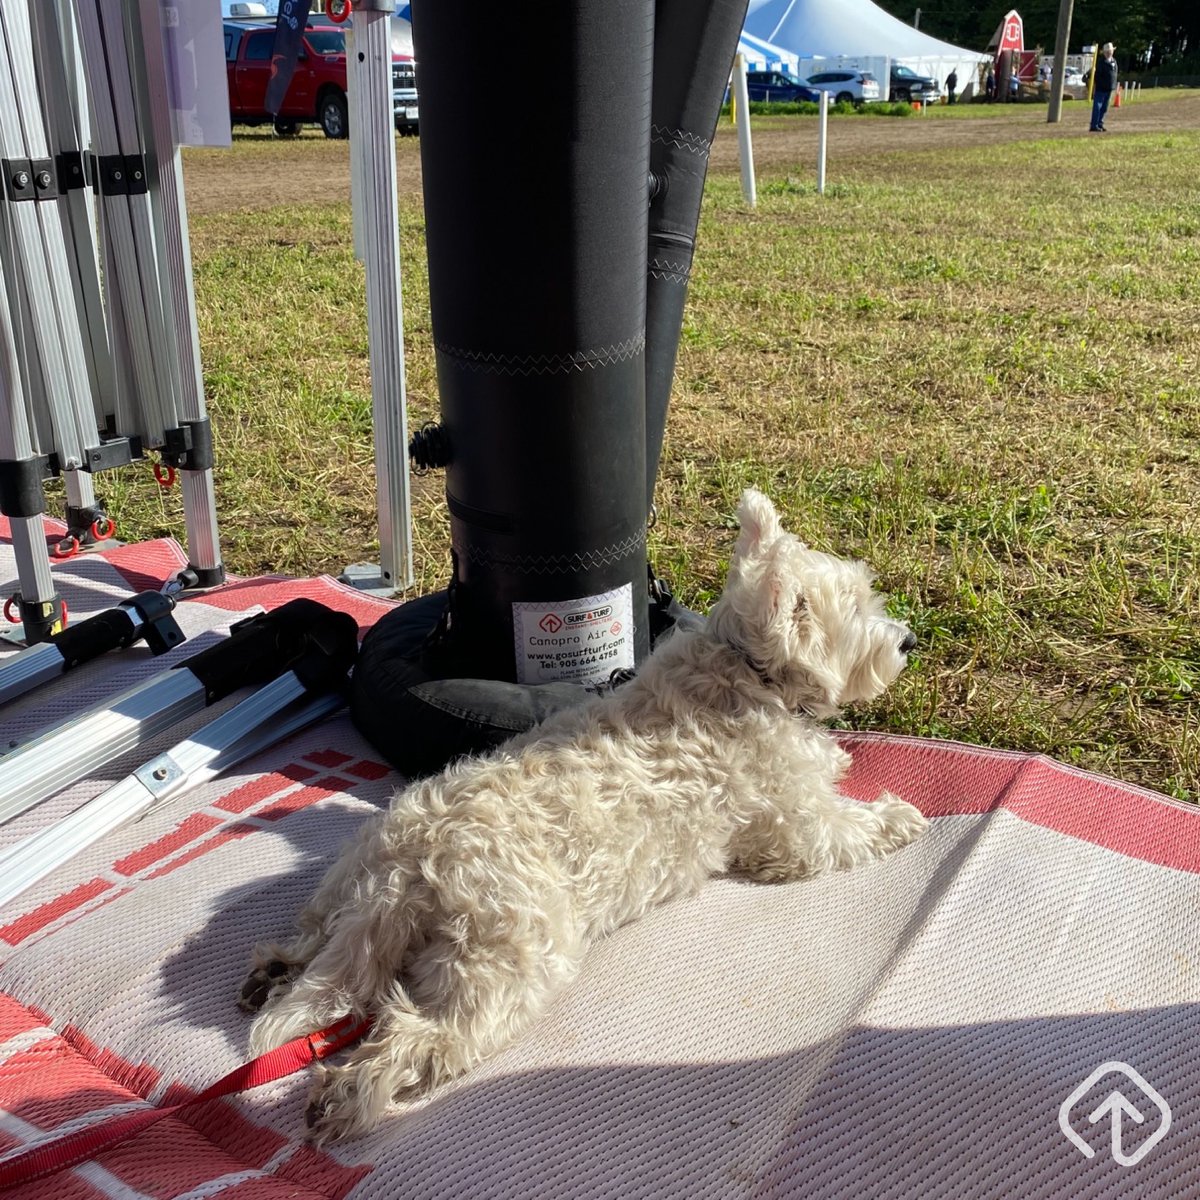 This week starting today, we are set up at @IPM2023official

Swipe 👉 to see Ela, our little mascot! 🐶

#plowingmatch #internationalplowingmatch #expo #branding #setup #surfturfshelters #popupshelter #popupcanopy #popupframe #popupshop